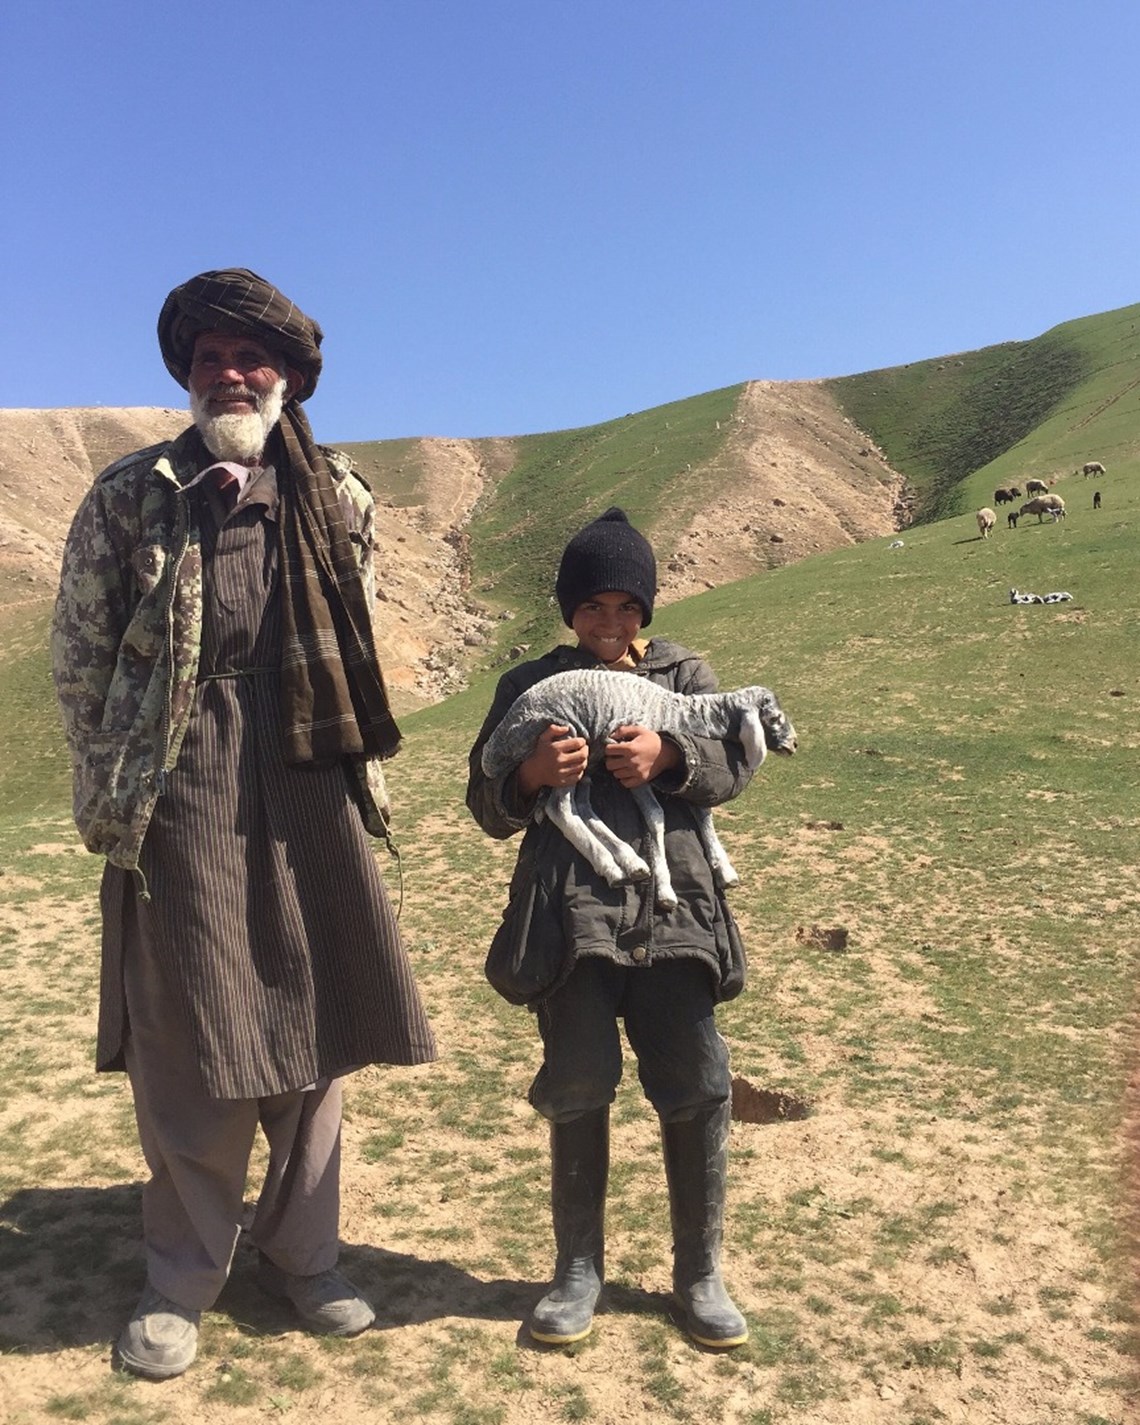 Abdul Hakim stands with his grandson on the land HALO cleared of mines